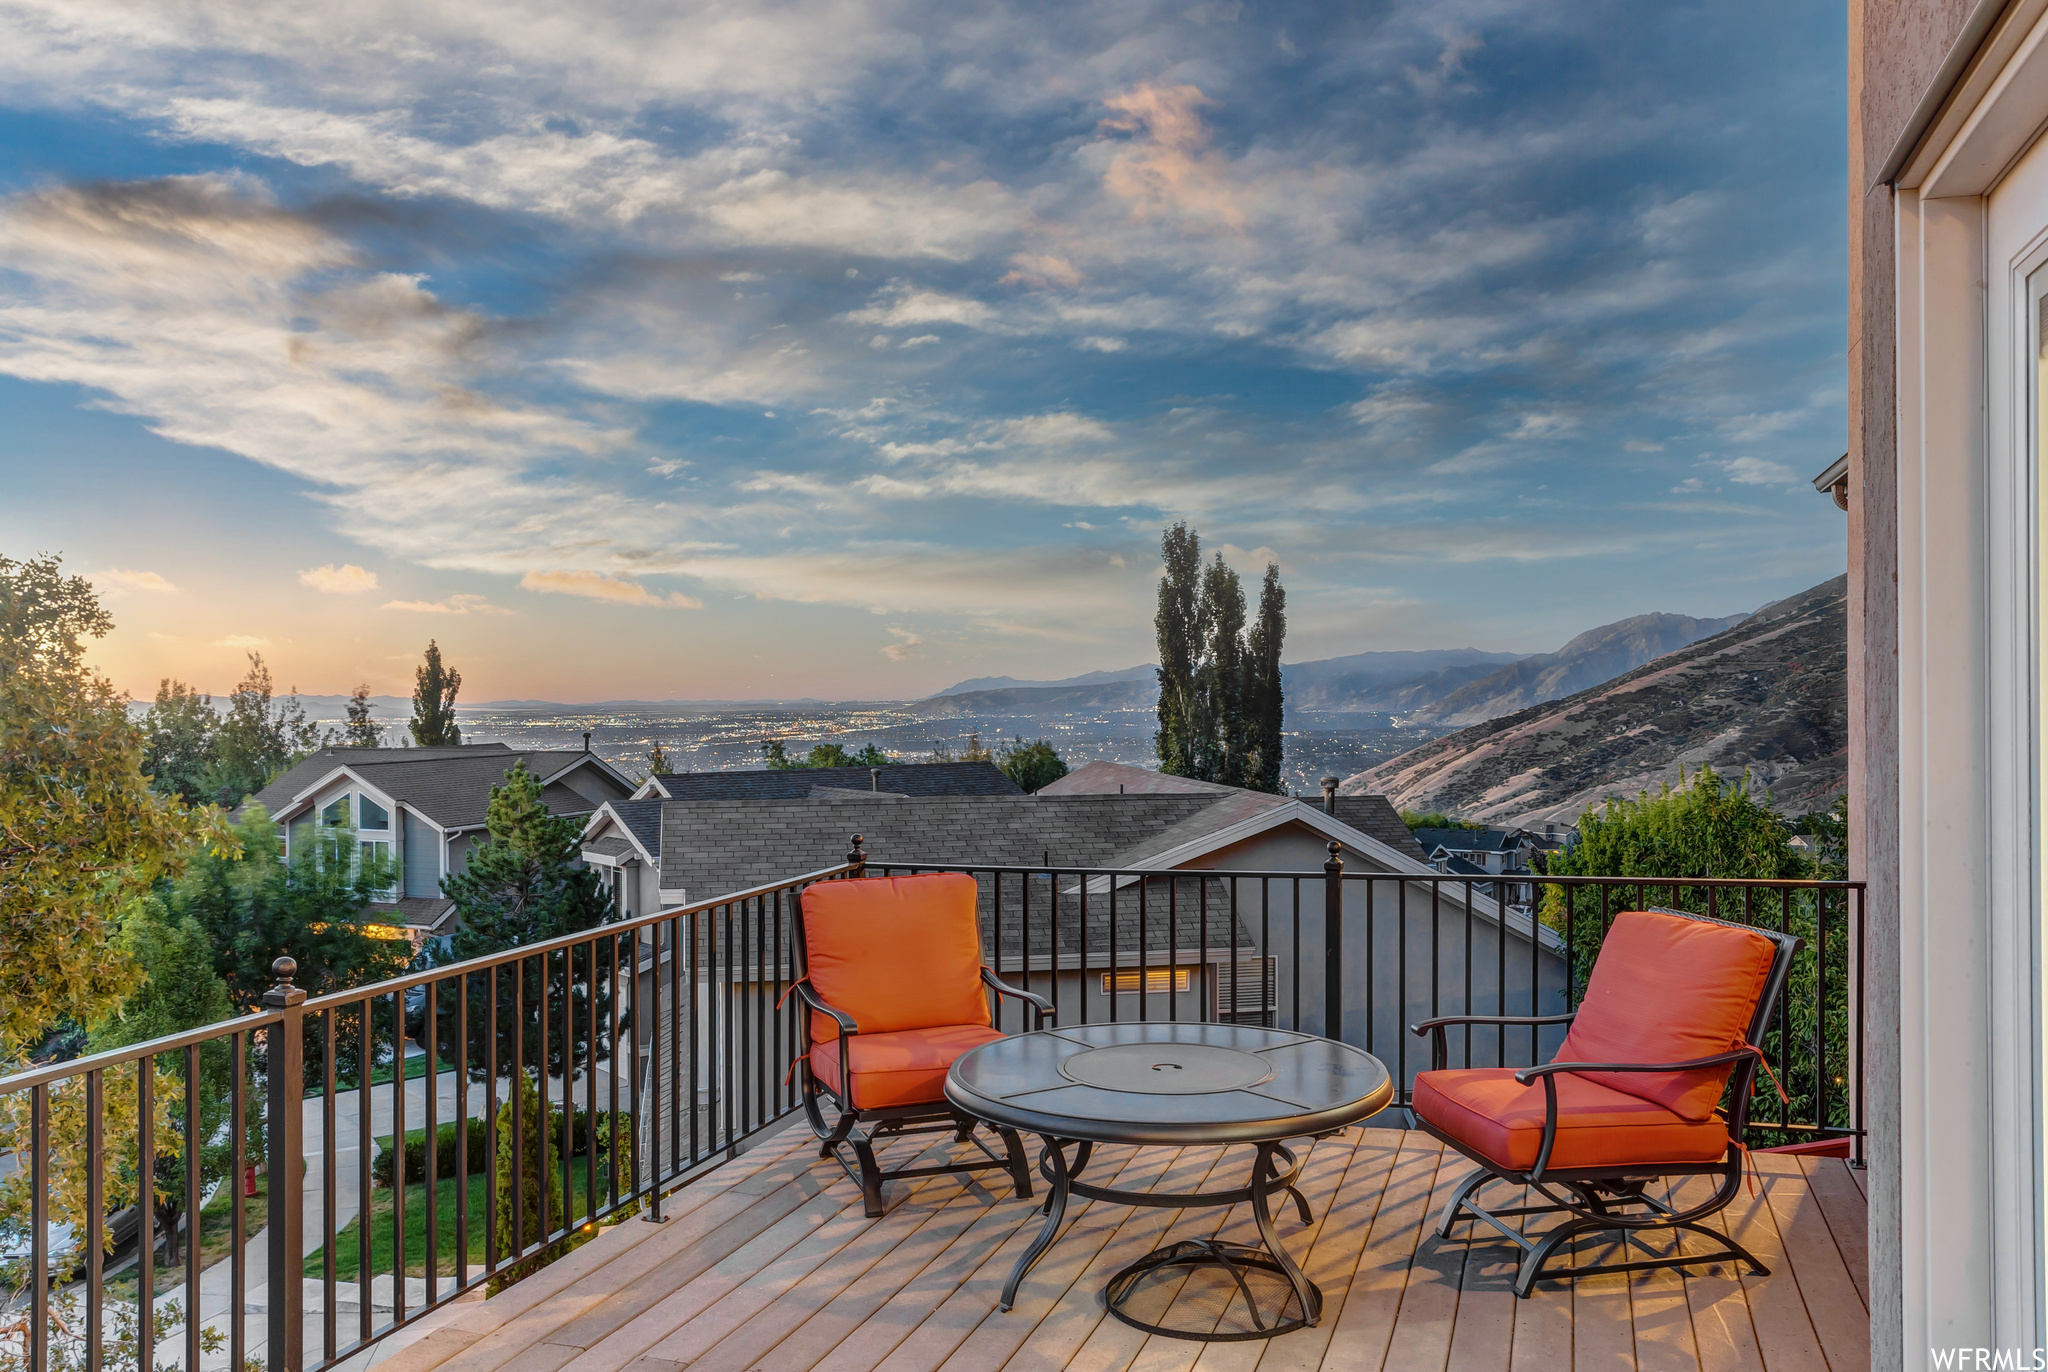 Deck at dusk featuring valley and mountain view